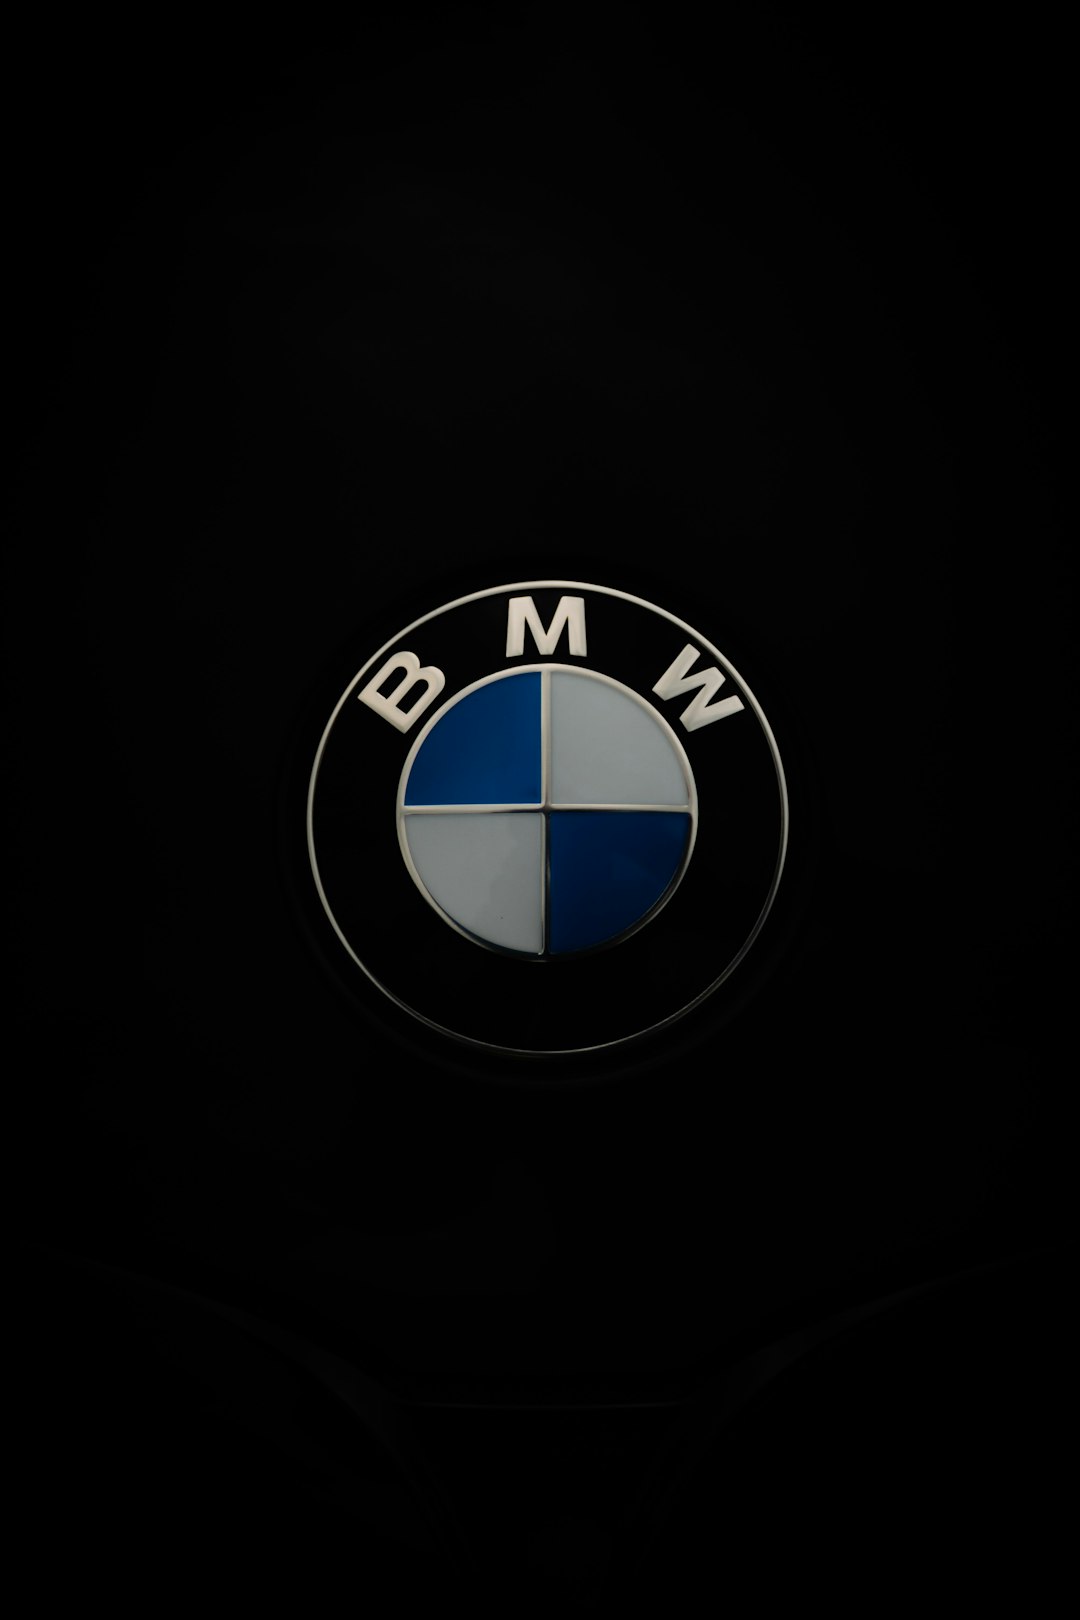 The BMW X5 is a luxury SUV known for its powerful performance and sleek design.